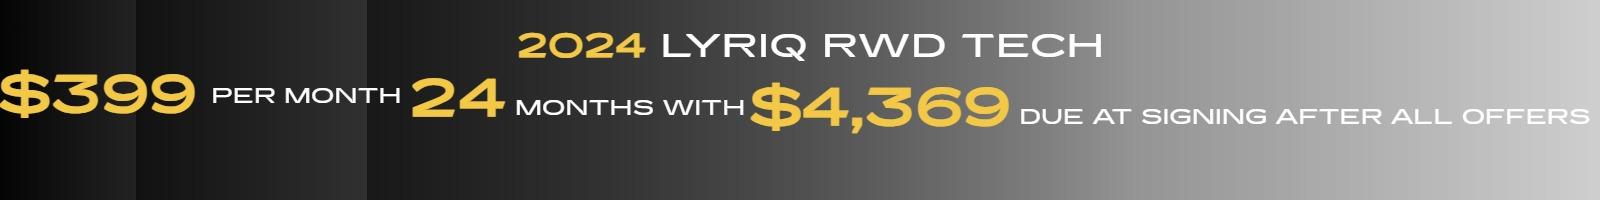 $399 PER MONTH 24 MONTHS WITH 4369 DUE AT SIGNING AFTER ALL OFFERS 2024 LYRIQ RWD TECH